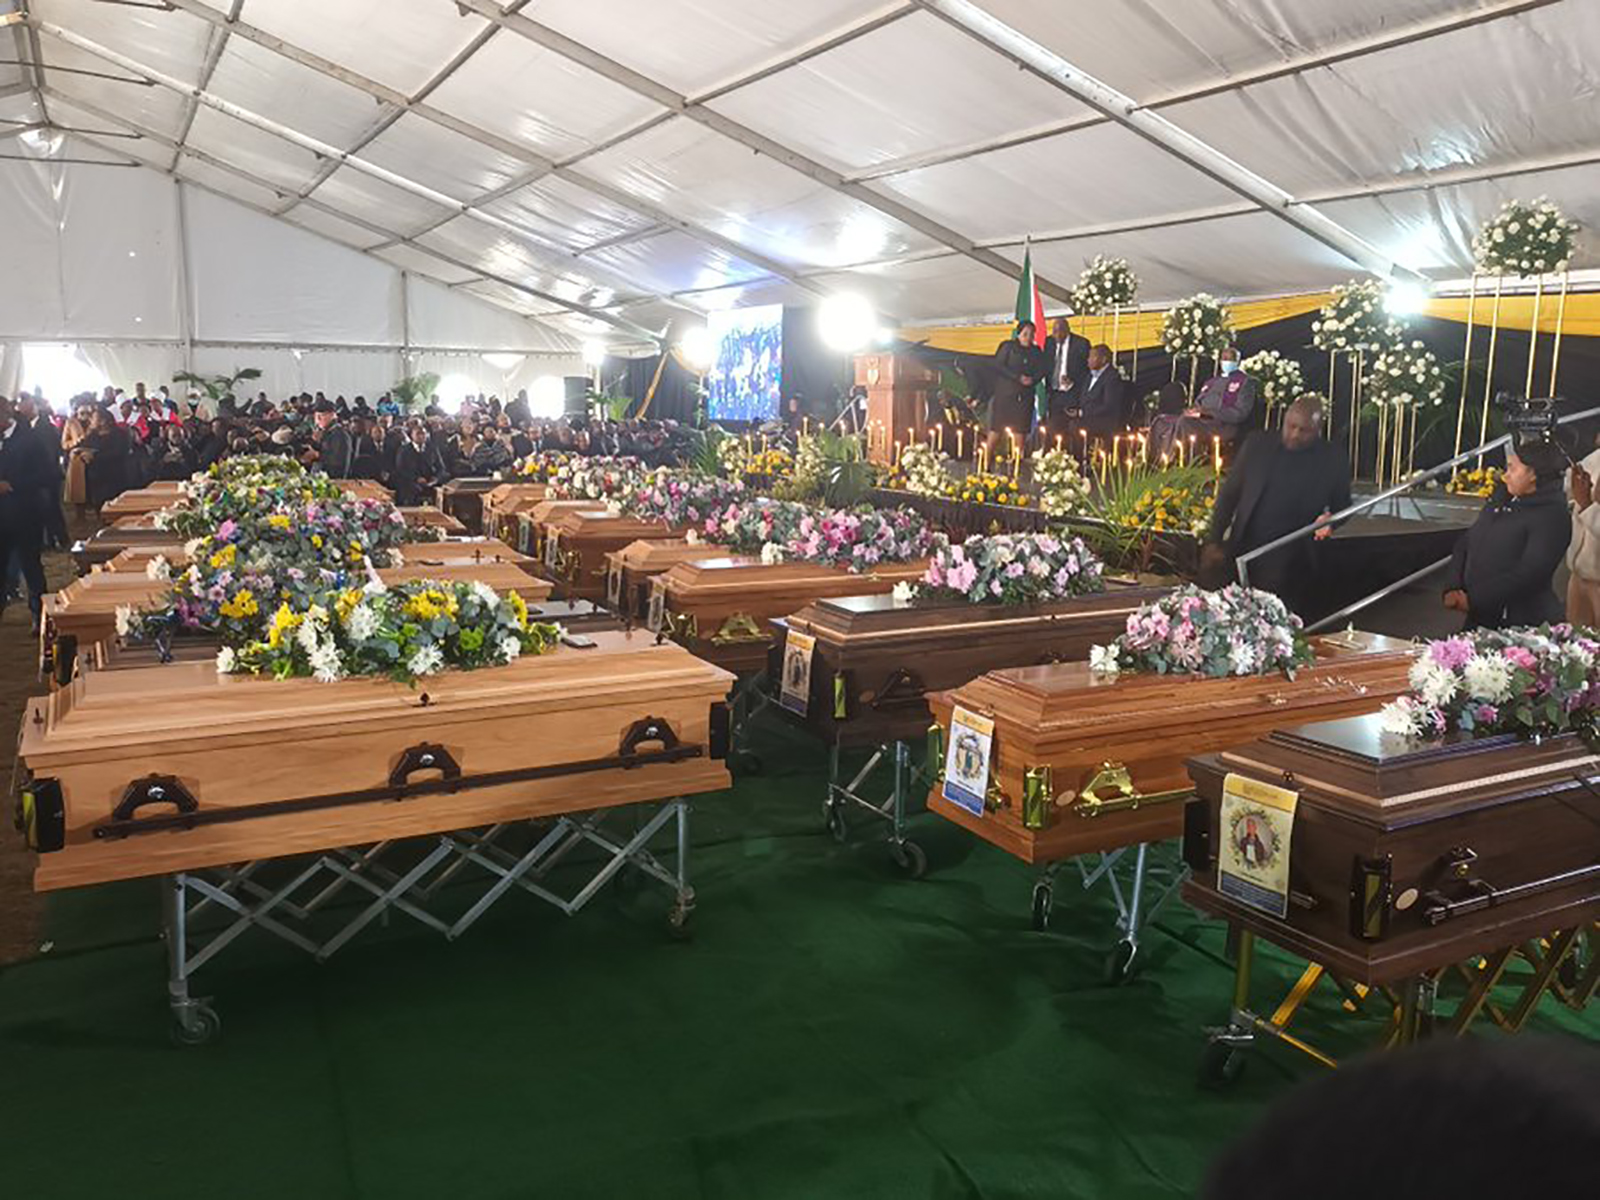 SAD: Enyobeni Tarven Victims Buried In A Mass Funeral Today 1